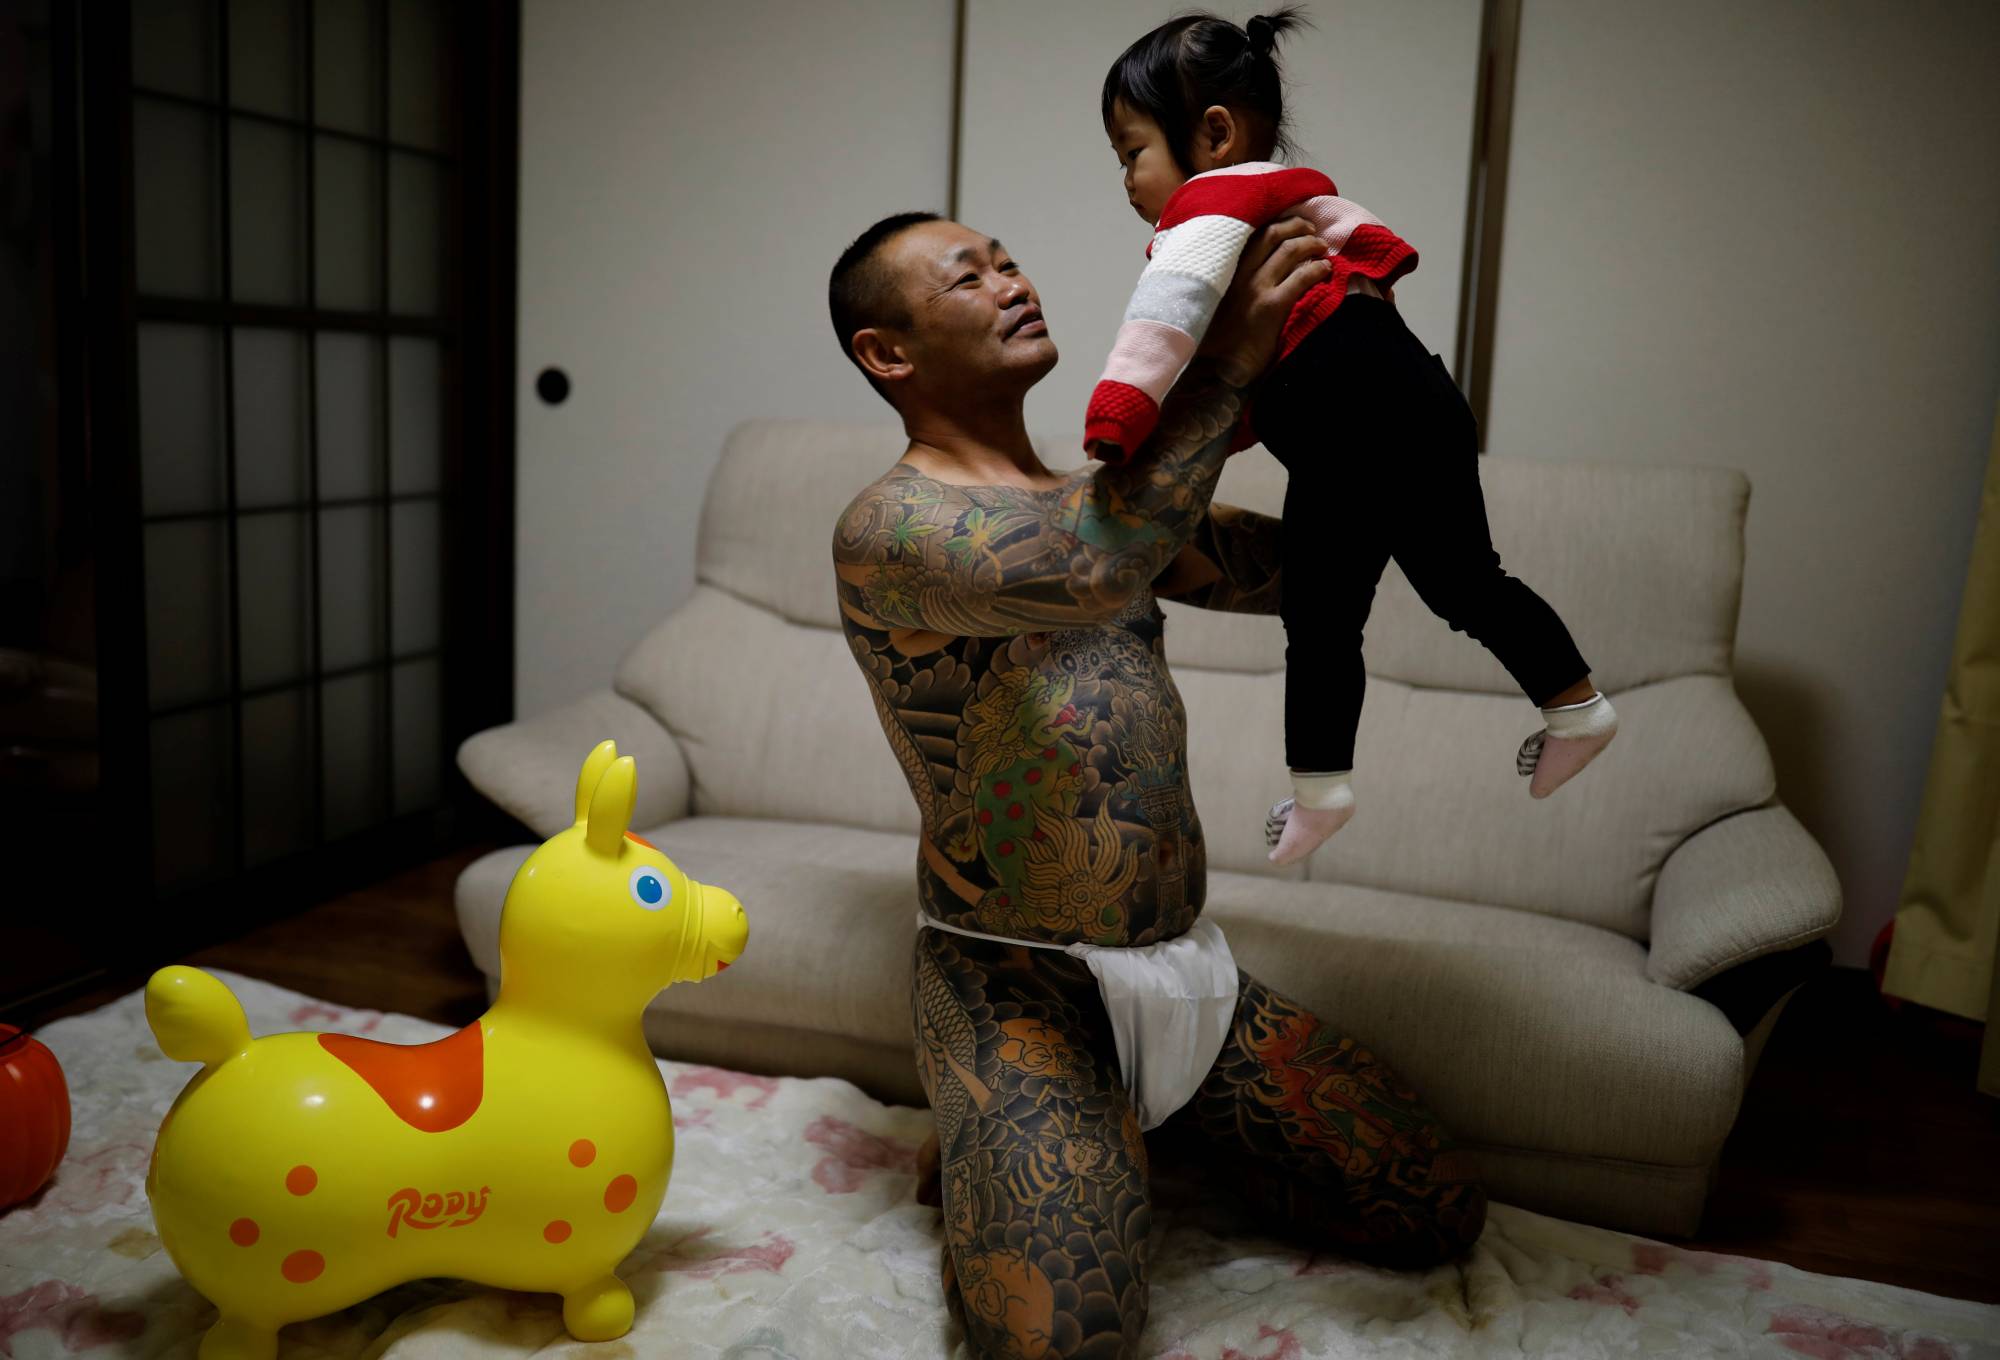 Scrap yard worker Hiroyuki Nemoto, 48, wears a traditional Japanese loincloth as he poses for a photo with his 1-year-old daughter, Tsumugi, at their house in Hitachinaka, Ibaraki Prefecture, in January. | REUTERS